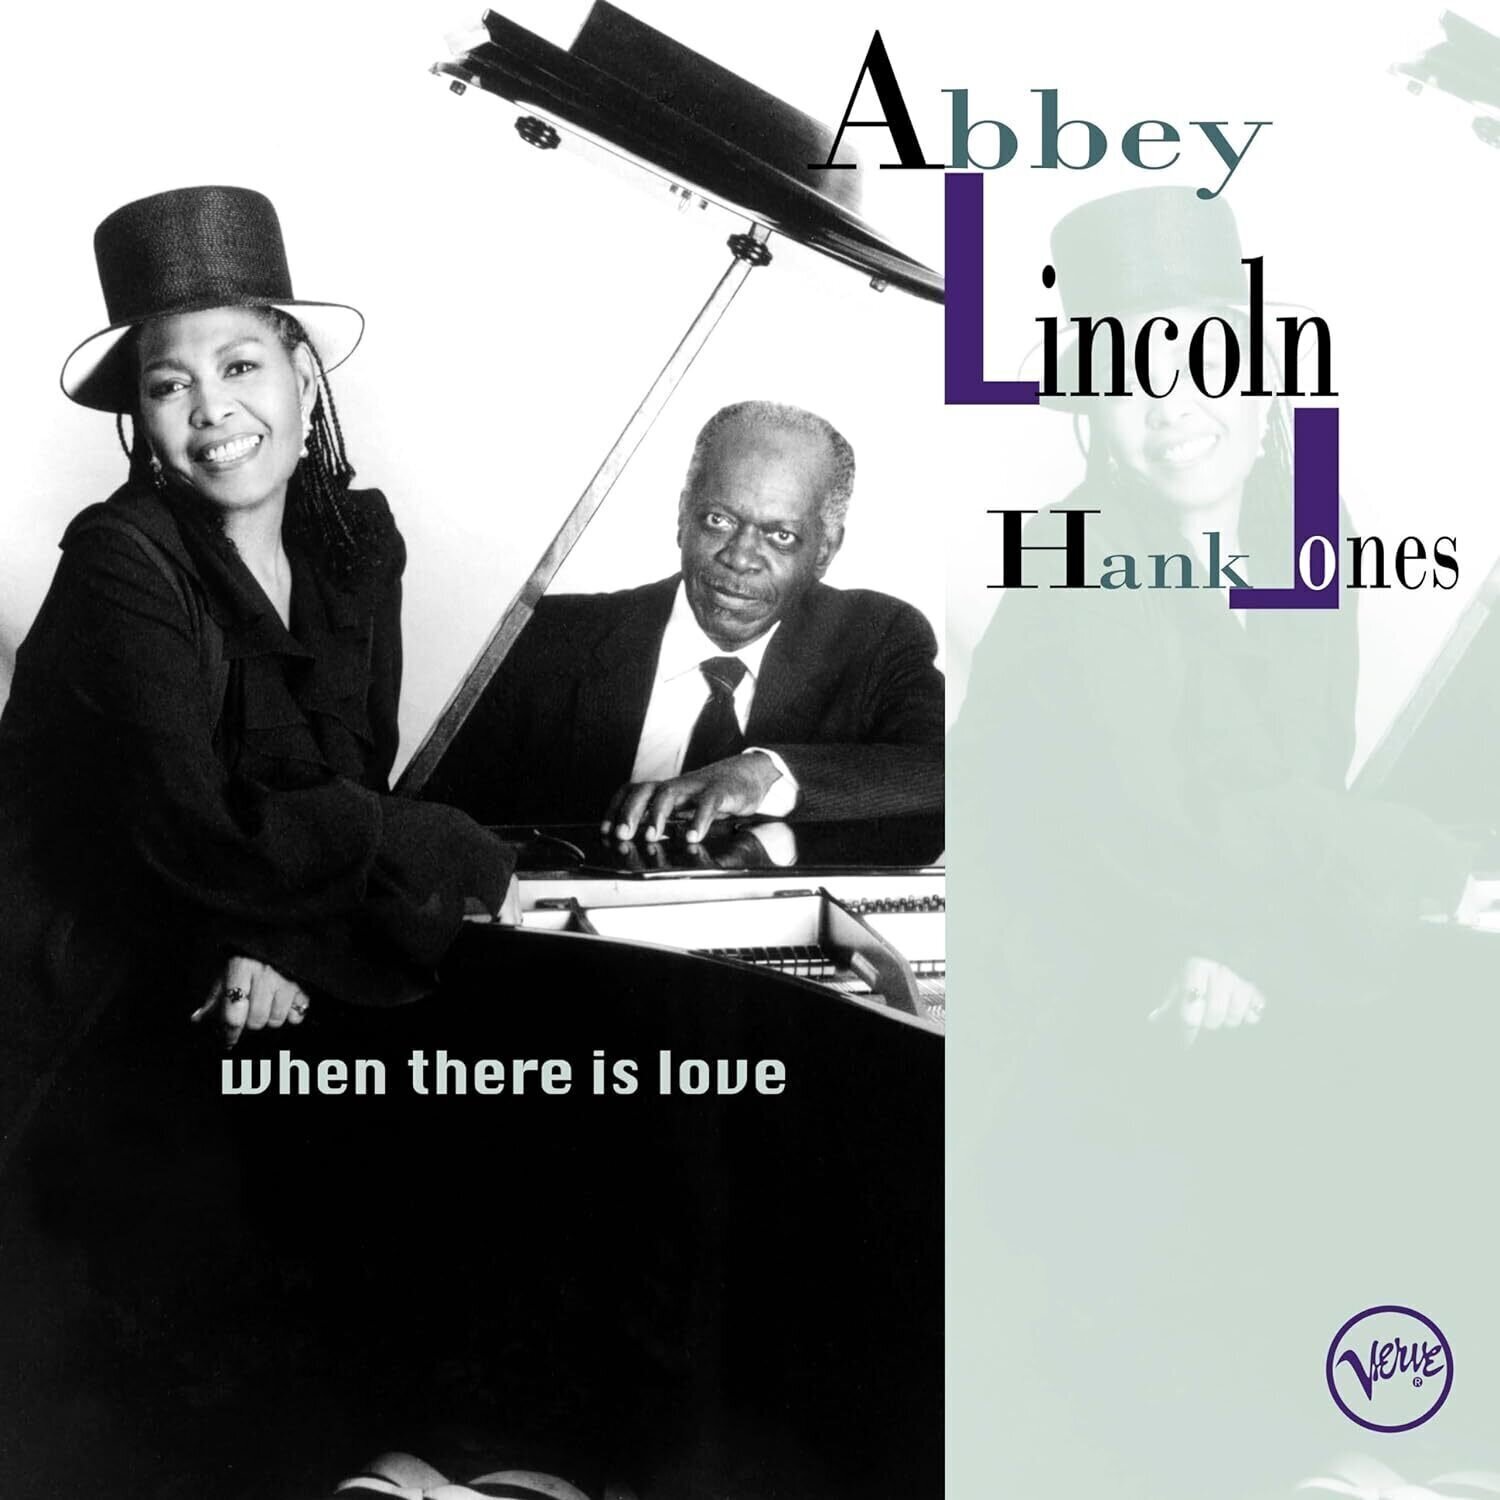 Abbey Lincoln & Hank Jones - When There Is Love (2 LP) Abbey Lincoln & Hank Jones